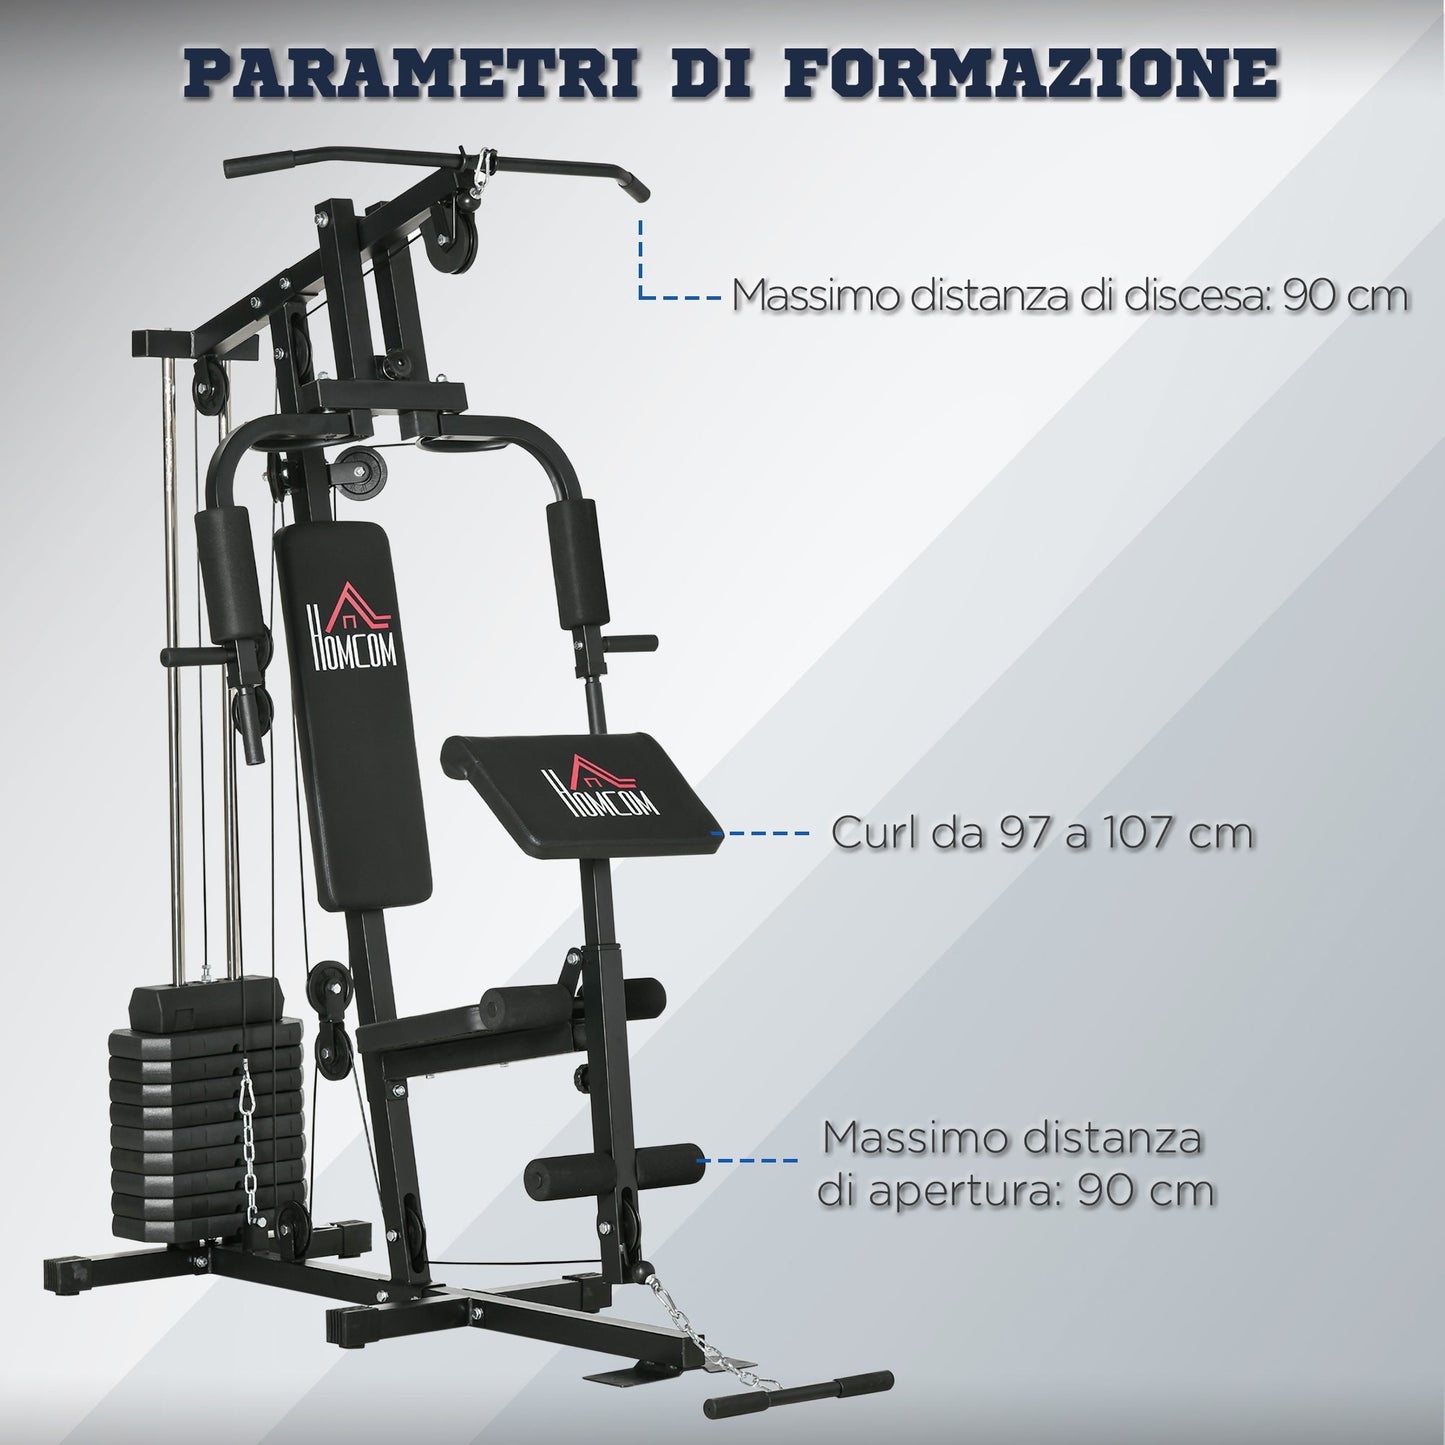 Multifunctional Fitness Station with weights up to 45kg and padded bench, 135x103x210cm